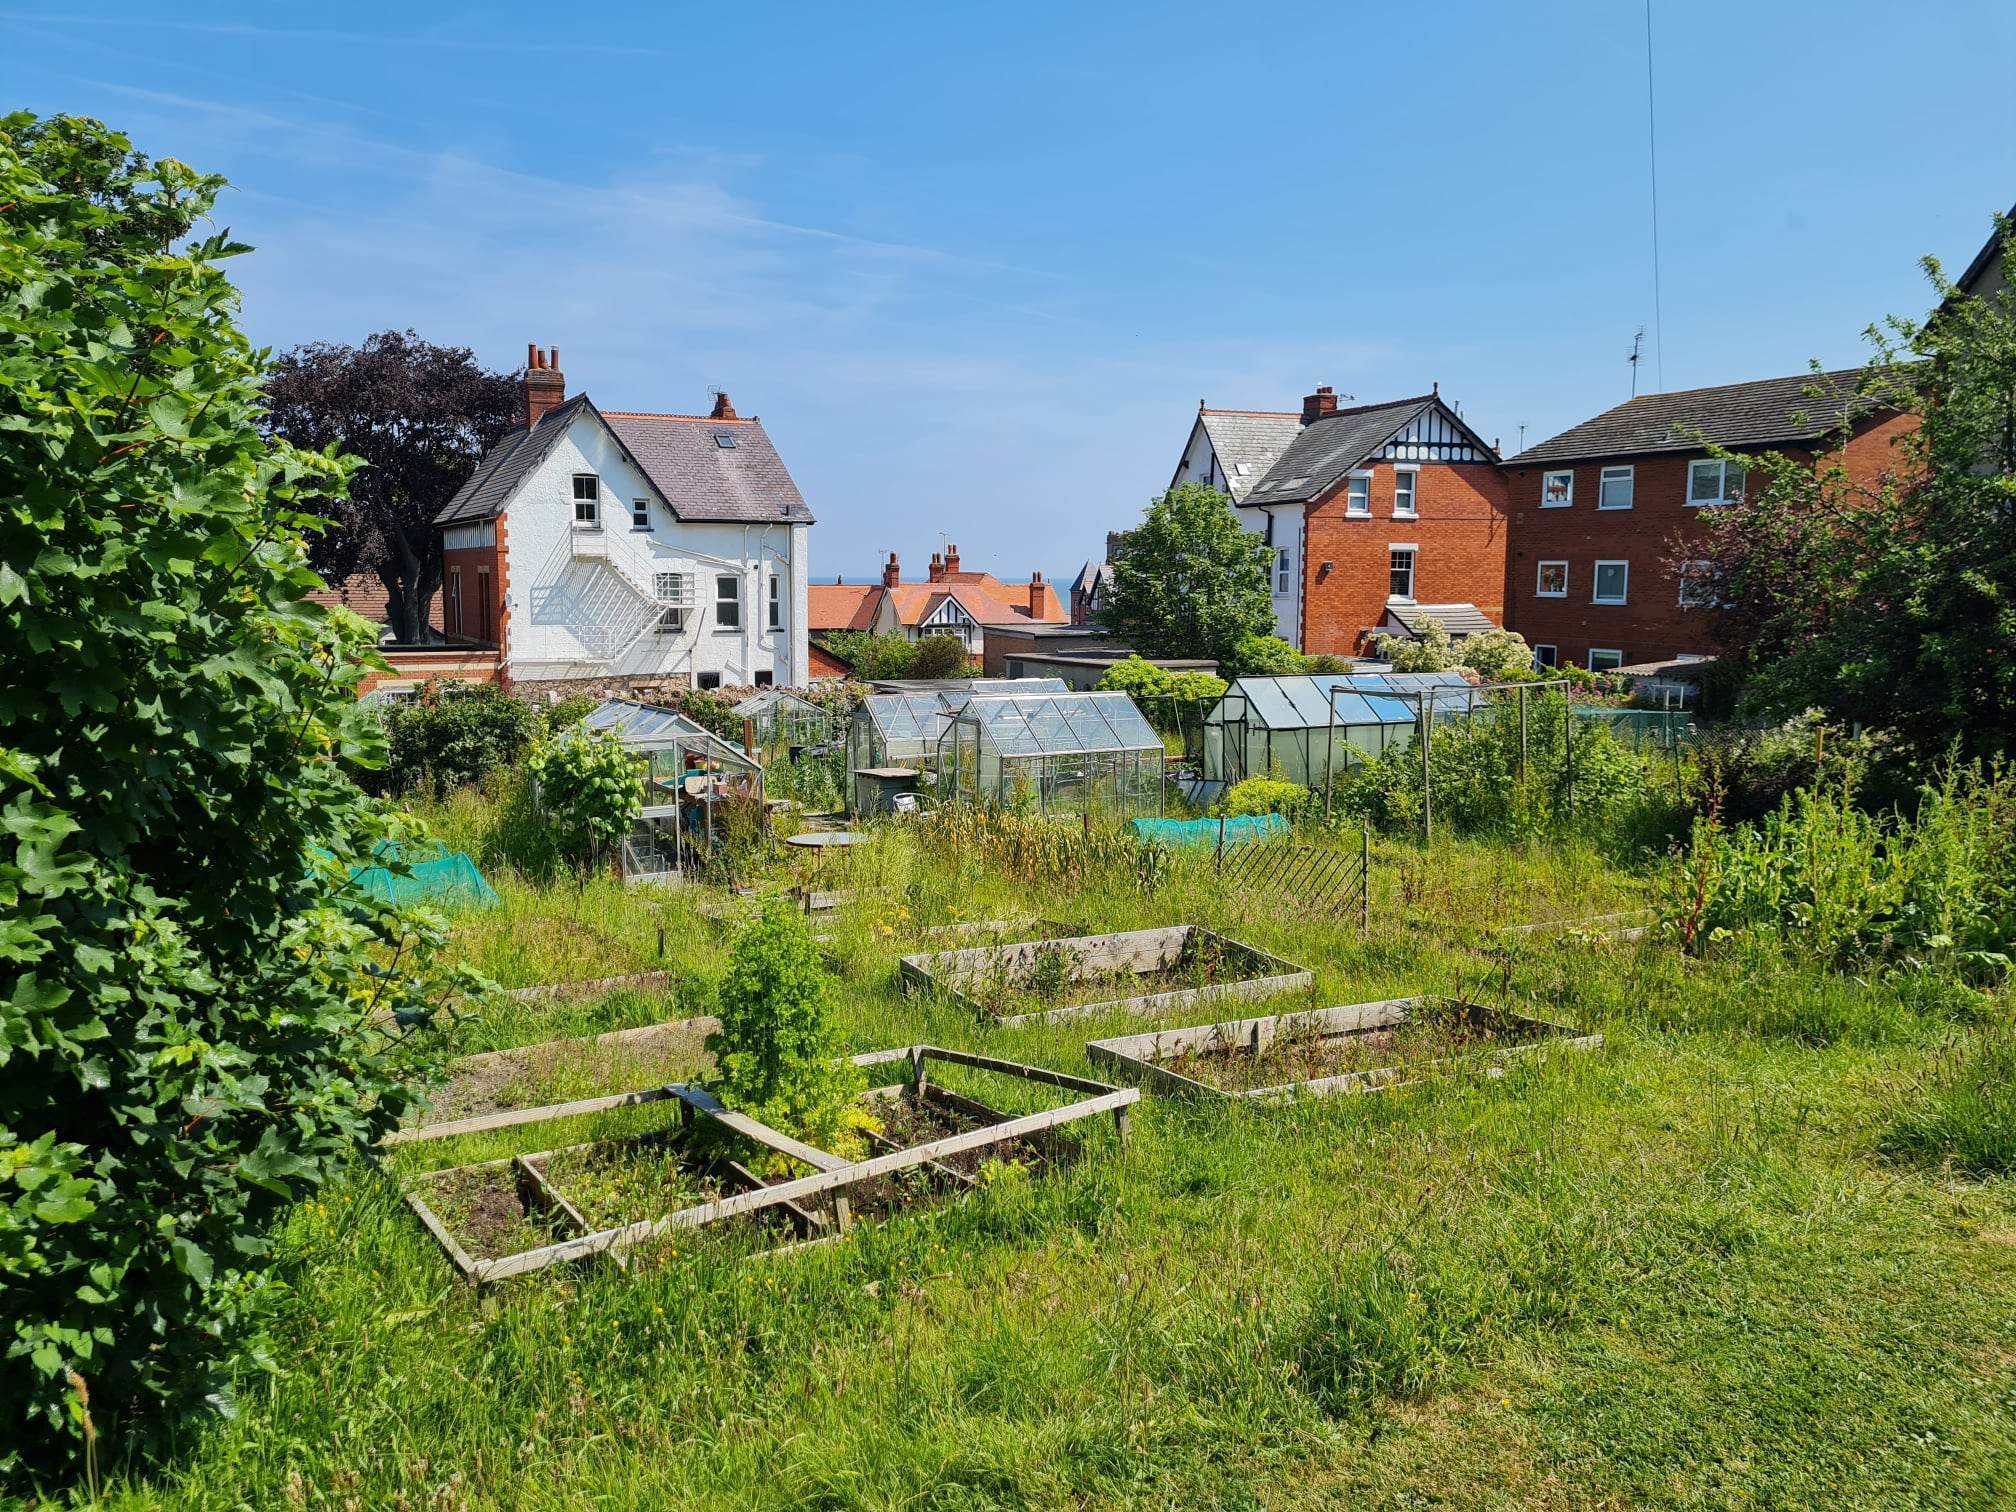 Allotments. Residents say the loss of a bowling green and relocation of an allotment to make way for new homes will cause traffic congestion, parking problems, and impact on vulnerable people.